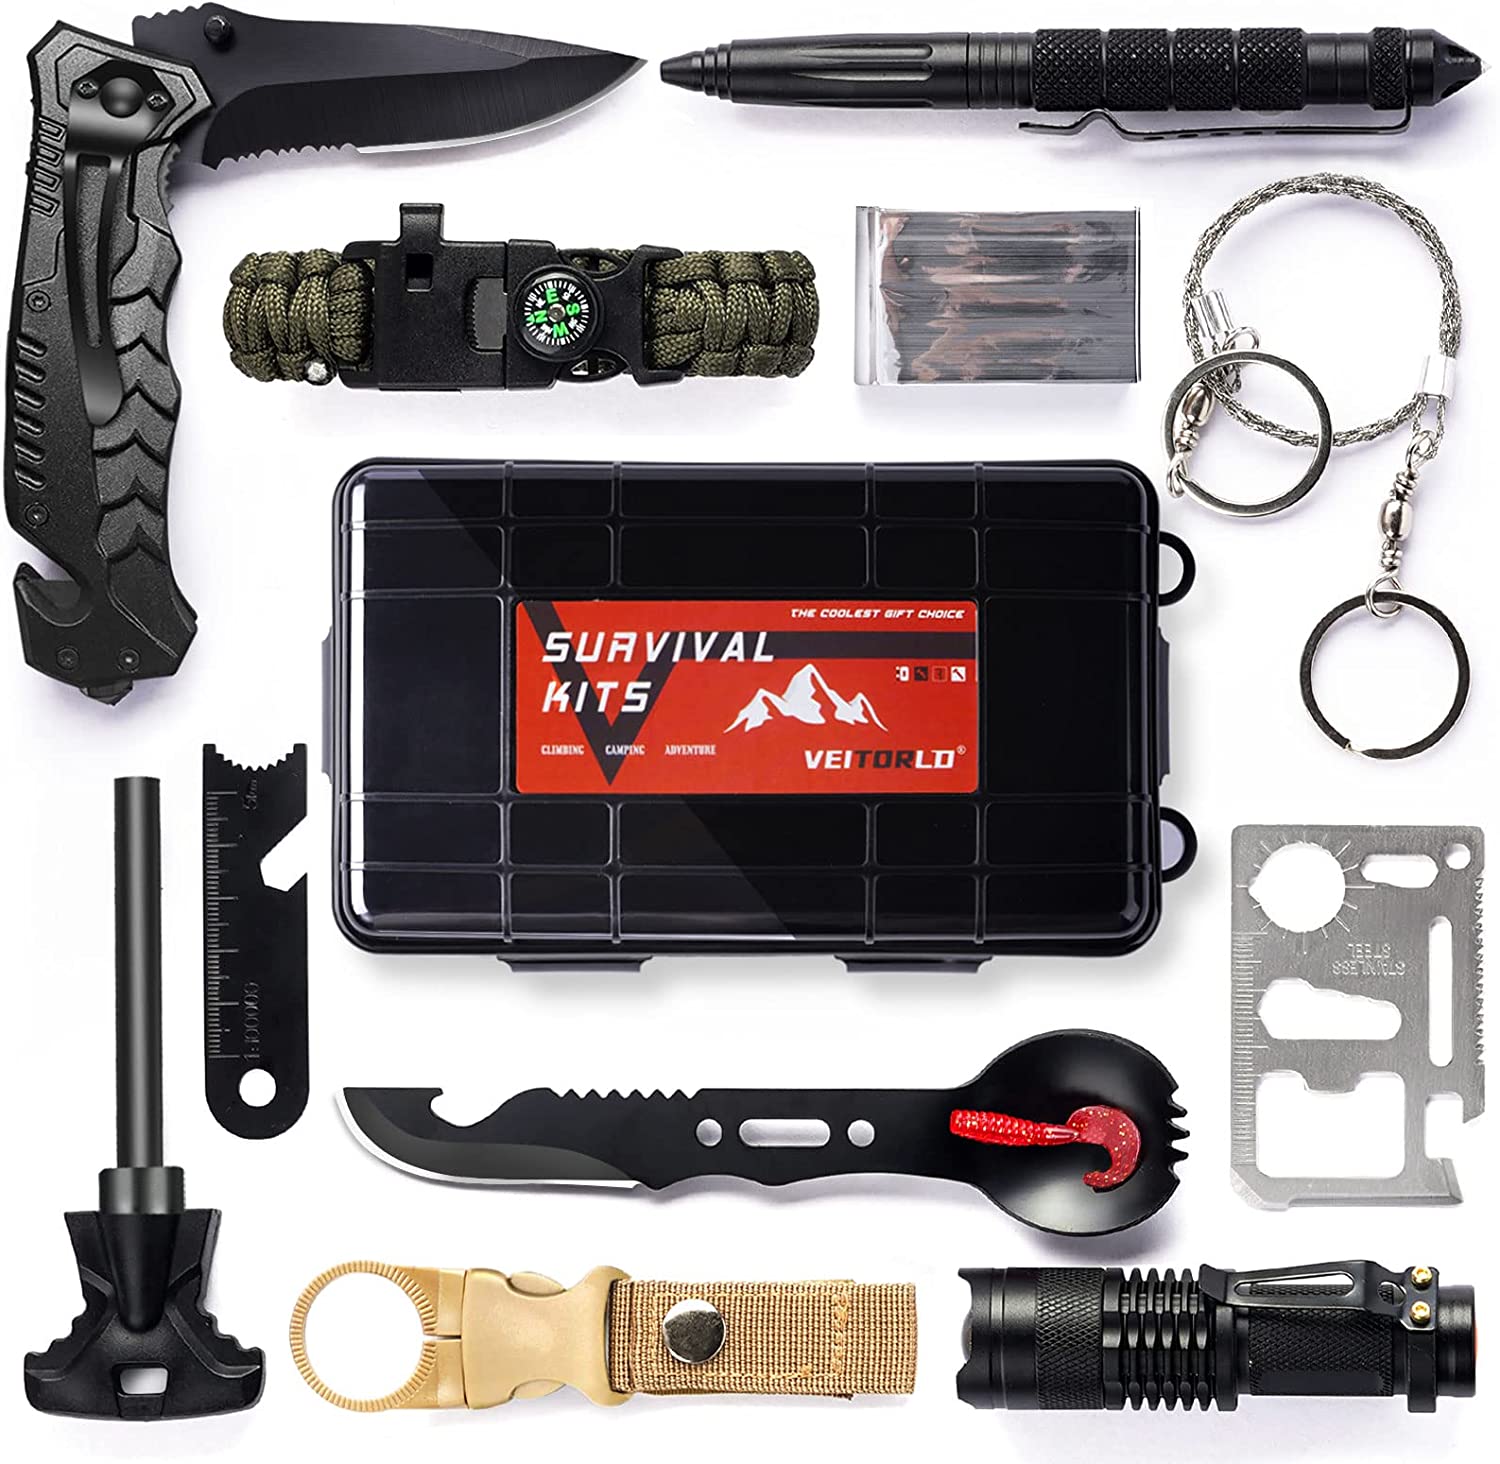 VEITORLD Gifts for Men Dad Husband Christmas, Stocking Stuffers for Men, Survival Gear and Equipment 12 in 1, Survival Kits, Cool Unique Fishing Hunting Birthday Gifts for Him Teen Boy Boyfriend Women